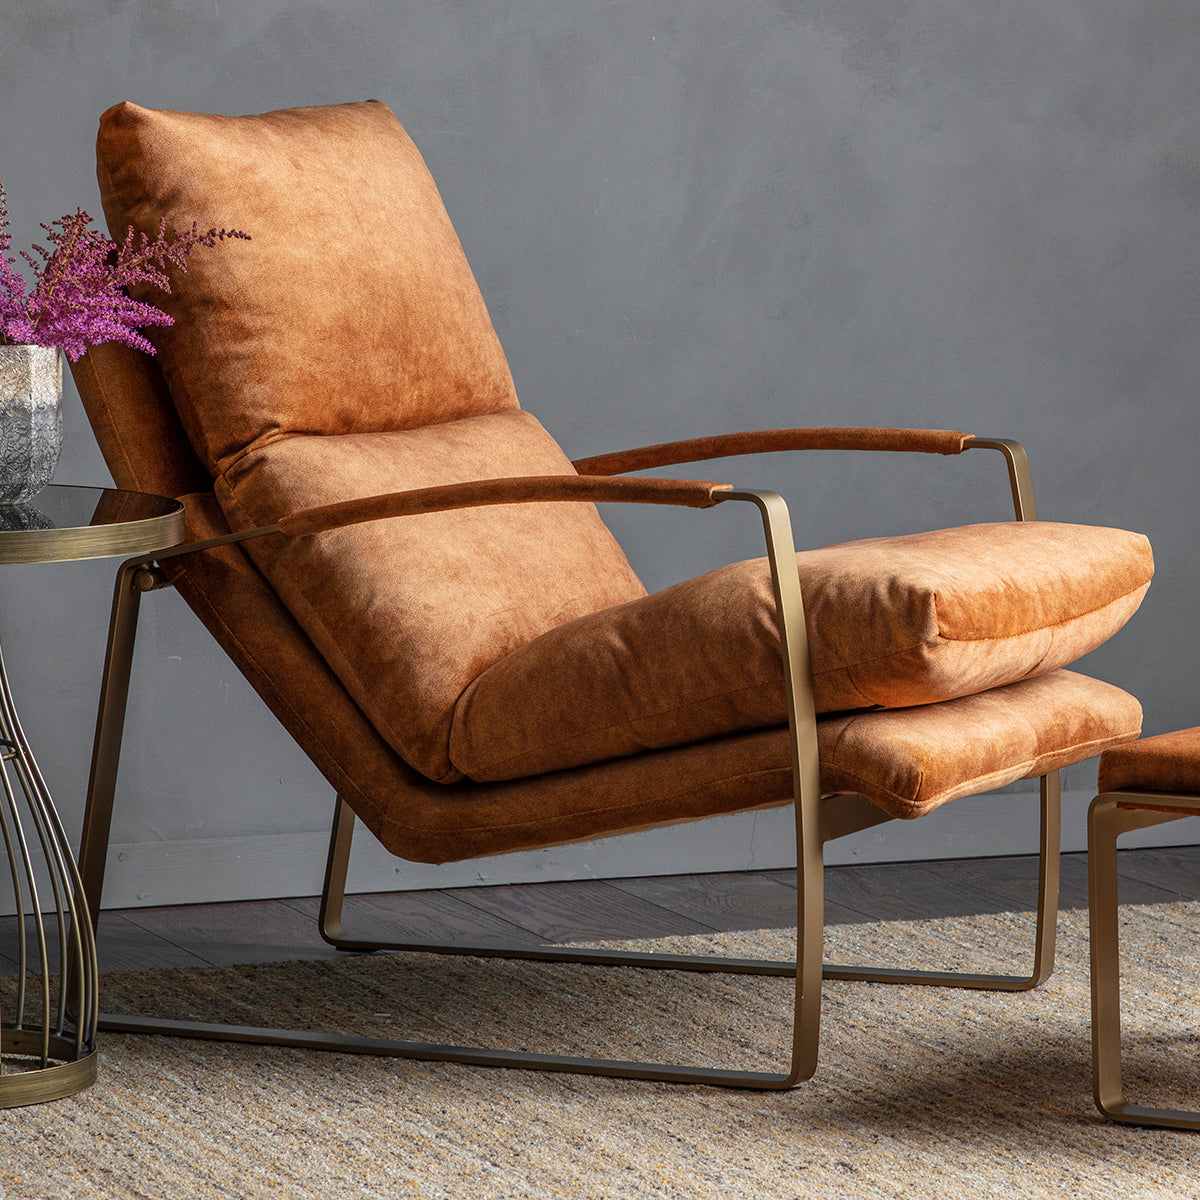 A Huish Lounger Ochre, a home furniture piece by Kikiathome.co.uk, beautifully complements the interior decor alongside an ottoman and coffee table.